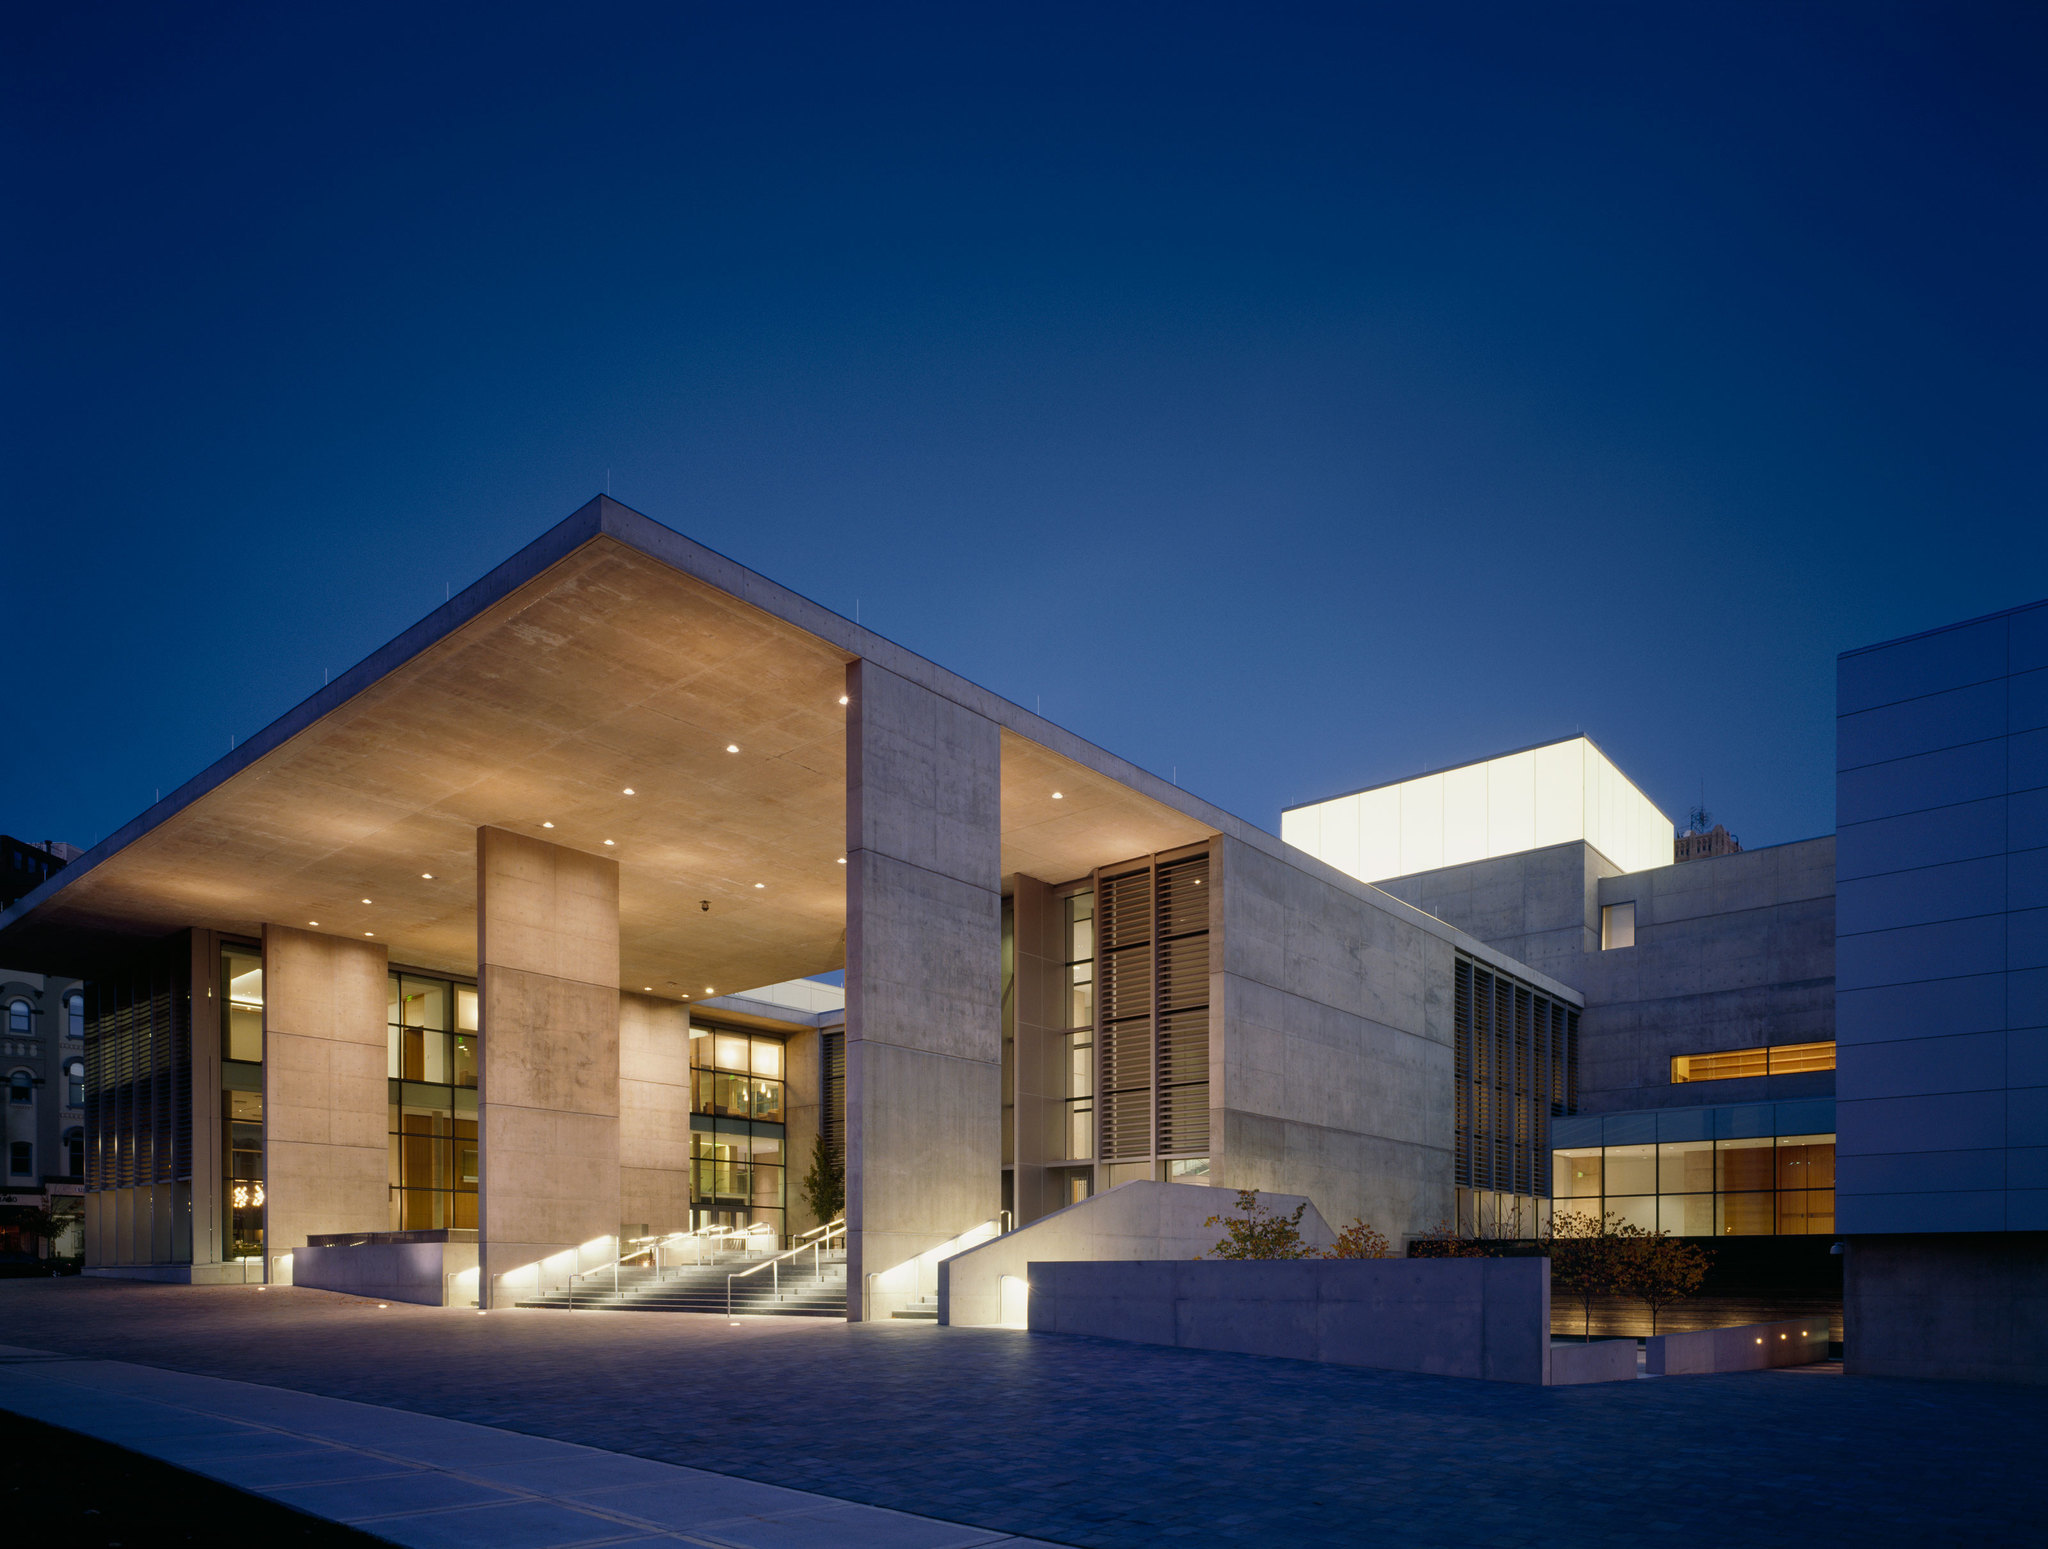 The entrance to the Grand Rapids Art Museum in Michigan, opened in 2007.